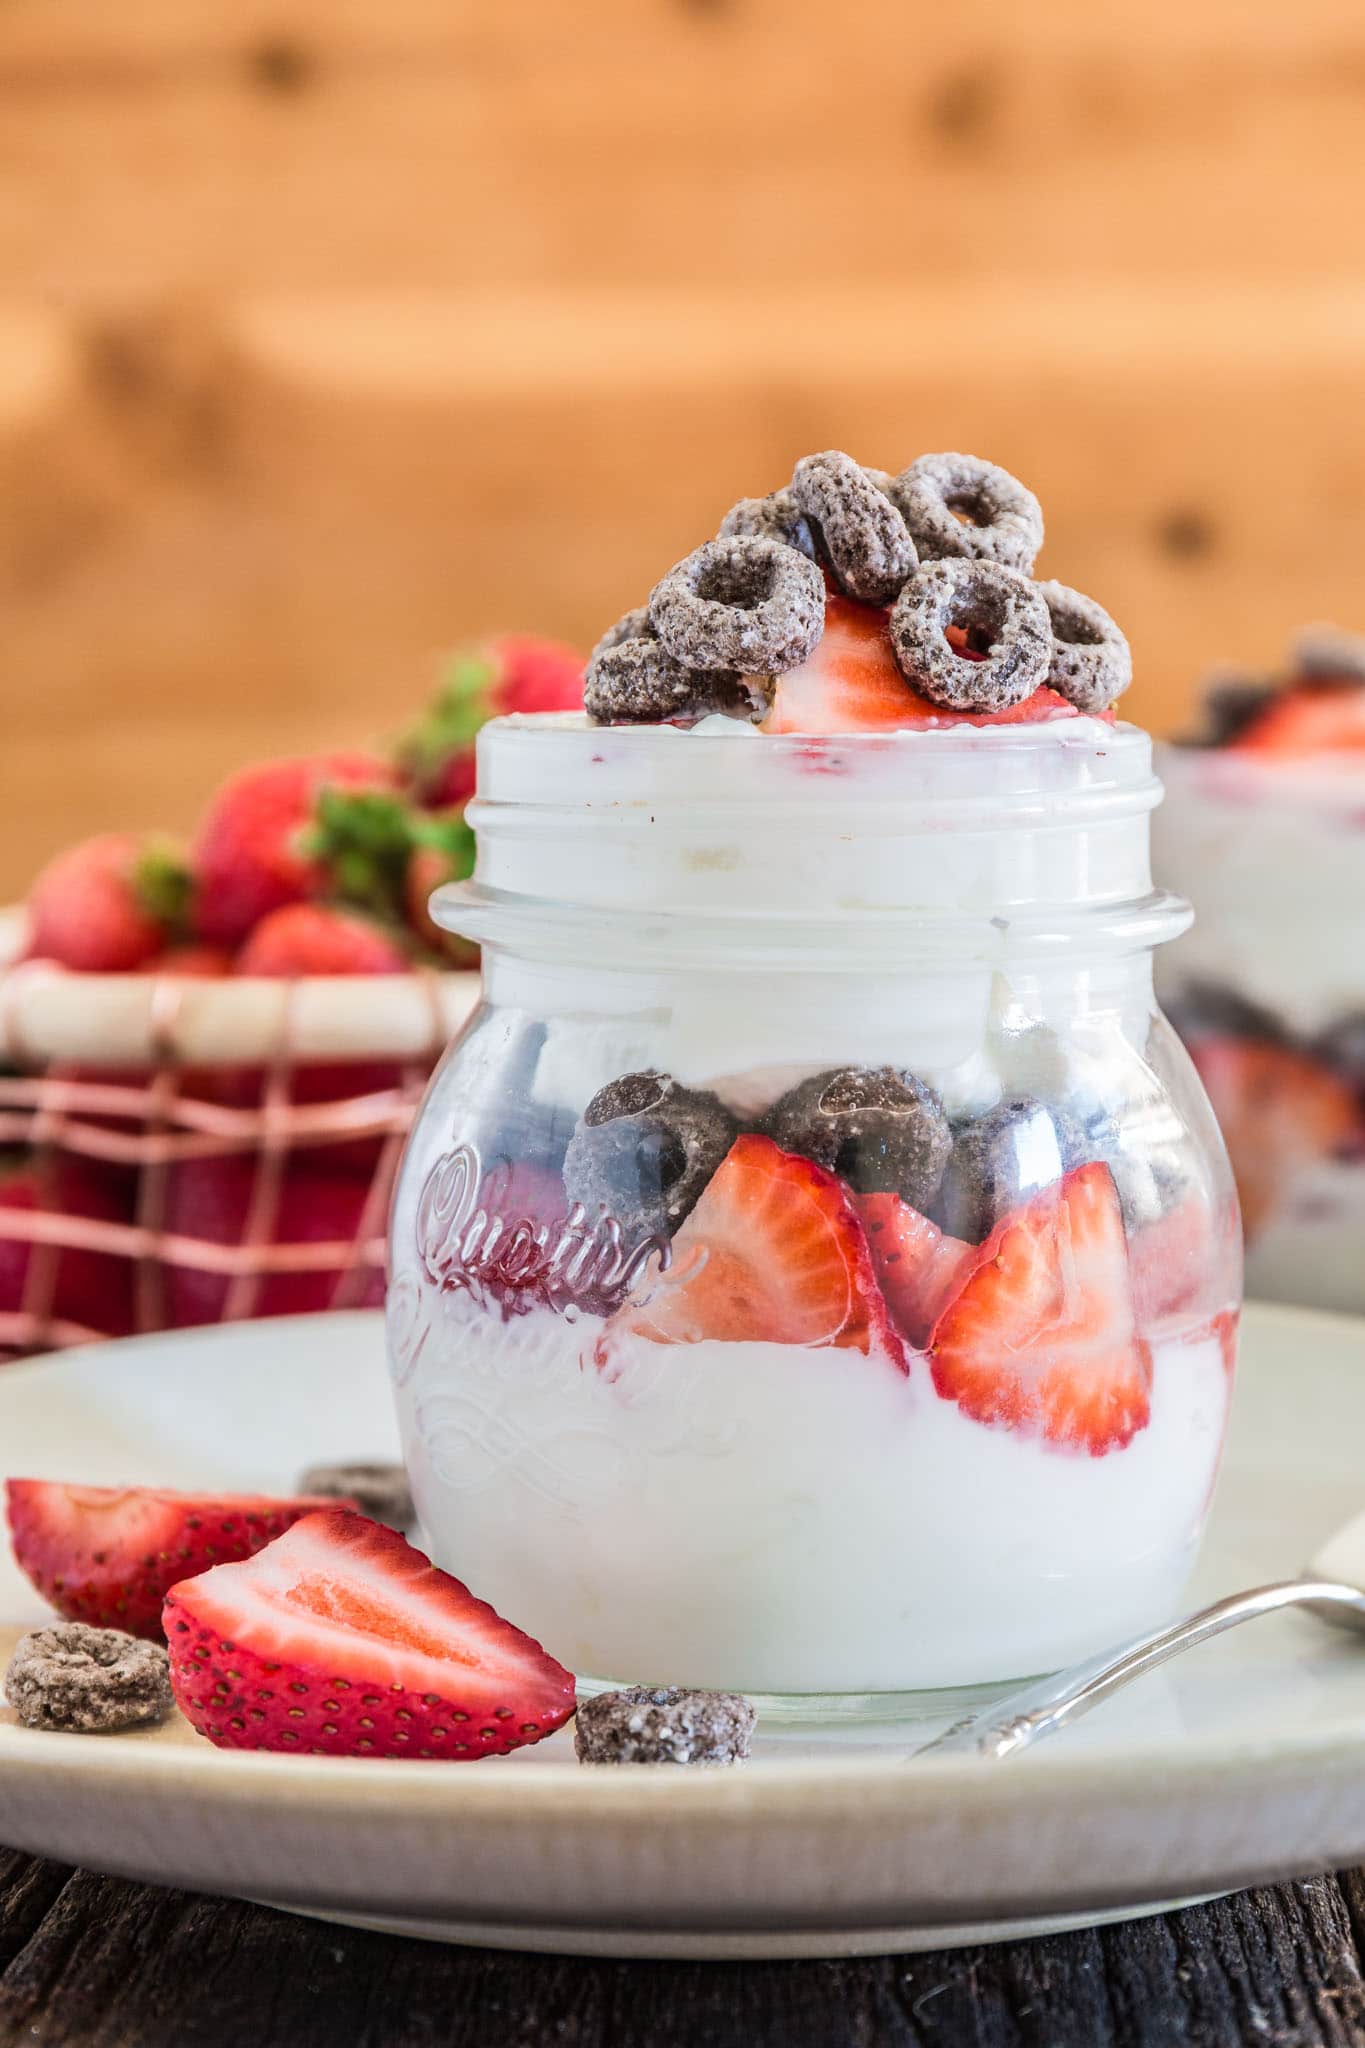 Oreo O's Breakfast Parfait | www.oliviascuisine.com | Tired of the same old, boring breakfast? These fun little parfaits are simple and oh so delicious, thanks to an old childhood favorite who is making a comeback! (Recipe and food photography by @oliviascuisine)